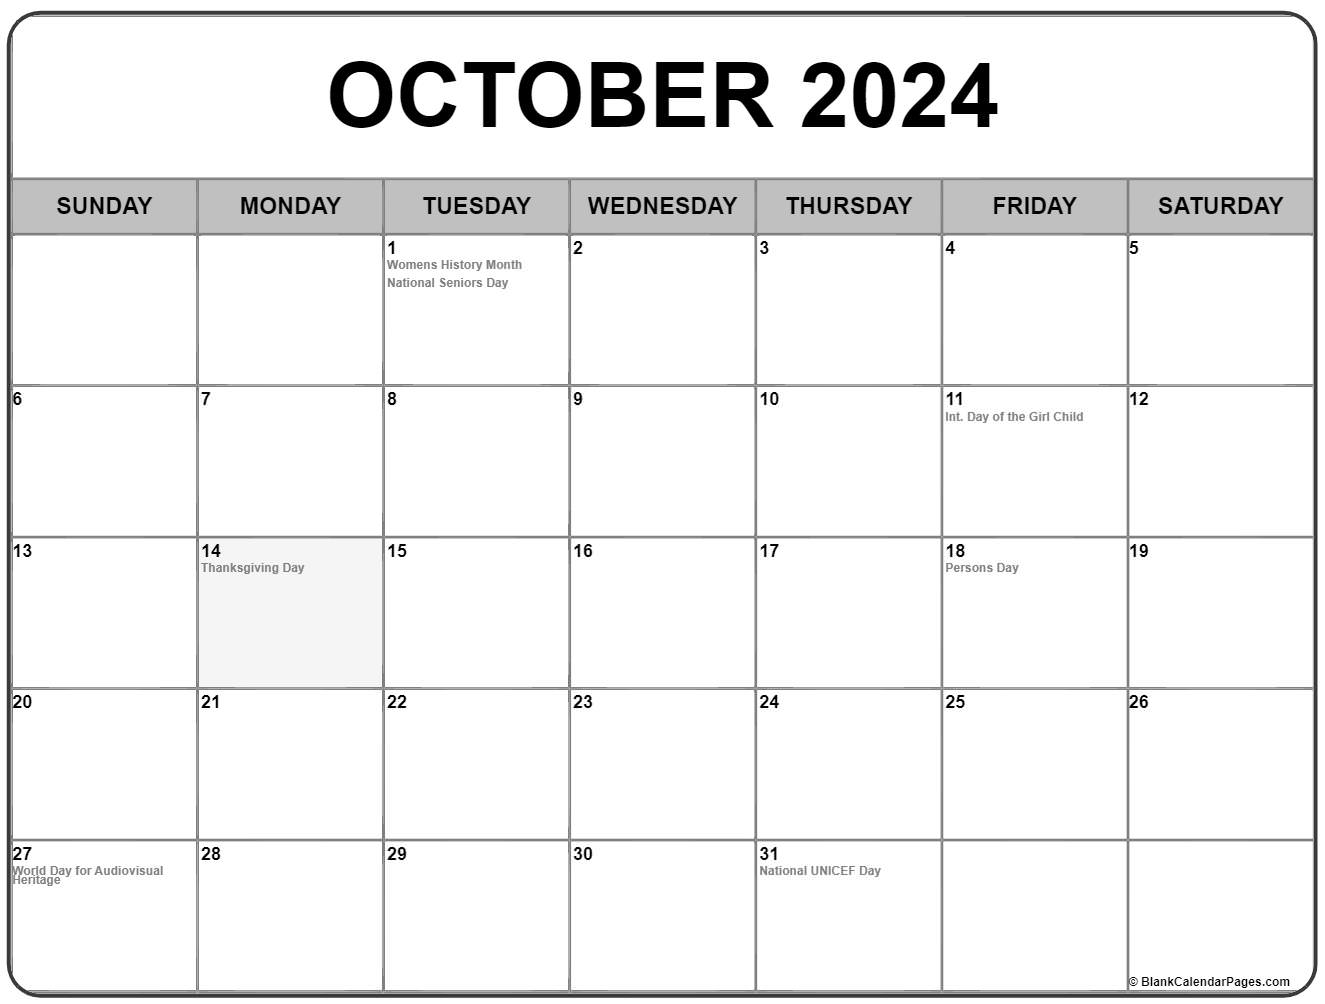 Thanksgiving Day 2024 Date, When is Thanksgiving in 2024